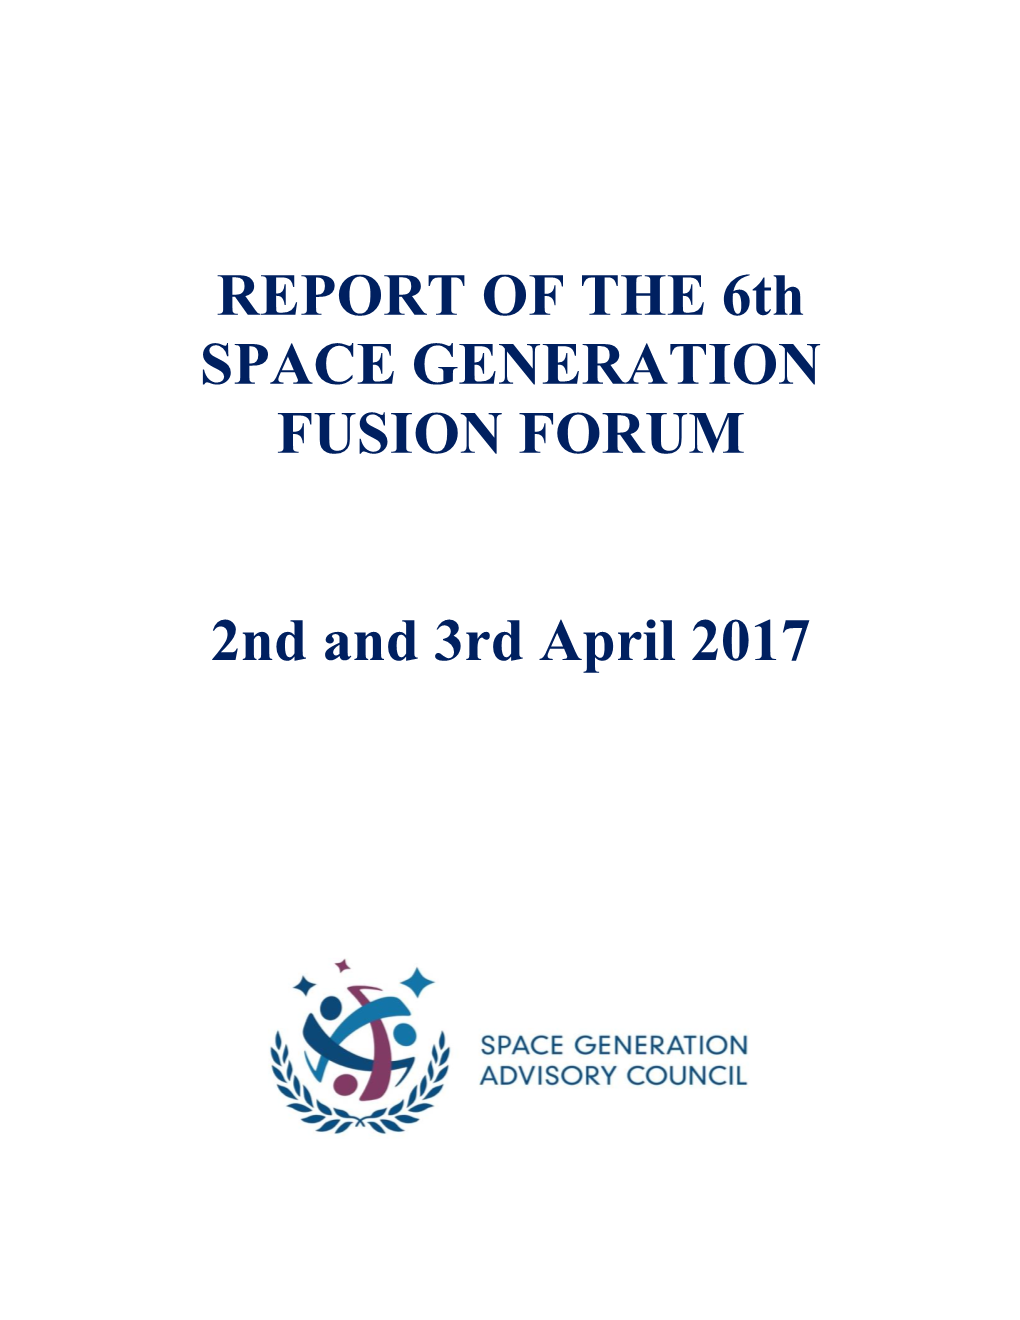 REPORT of the 6Th SPACE GENERATION FUSION FORUM